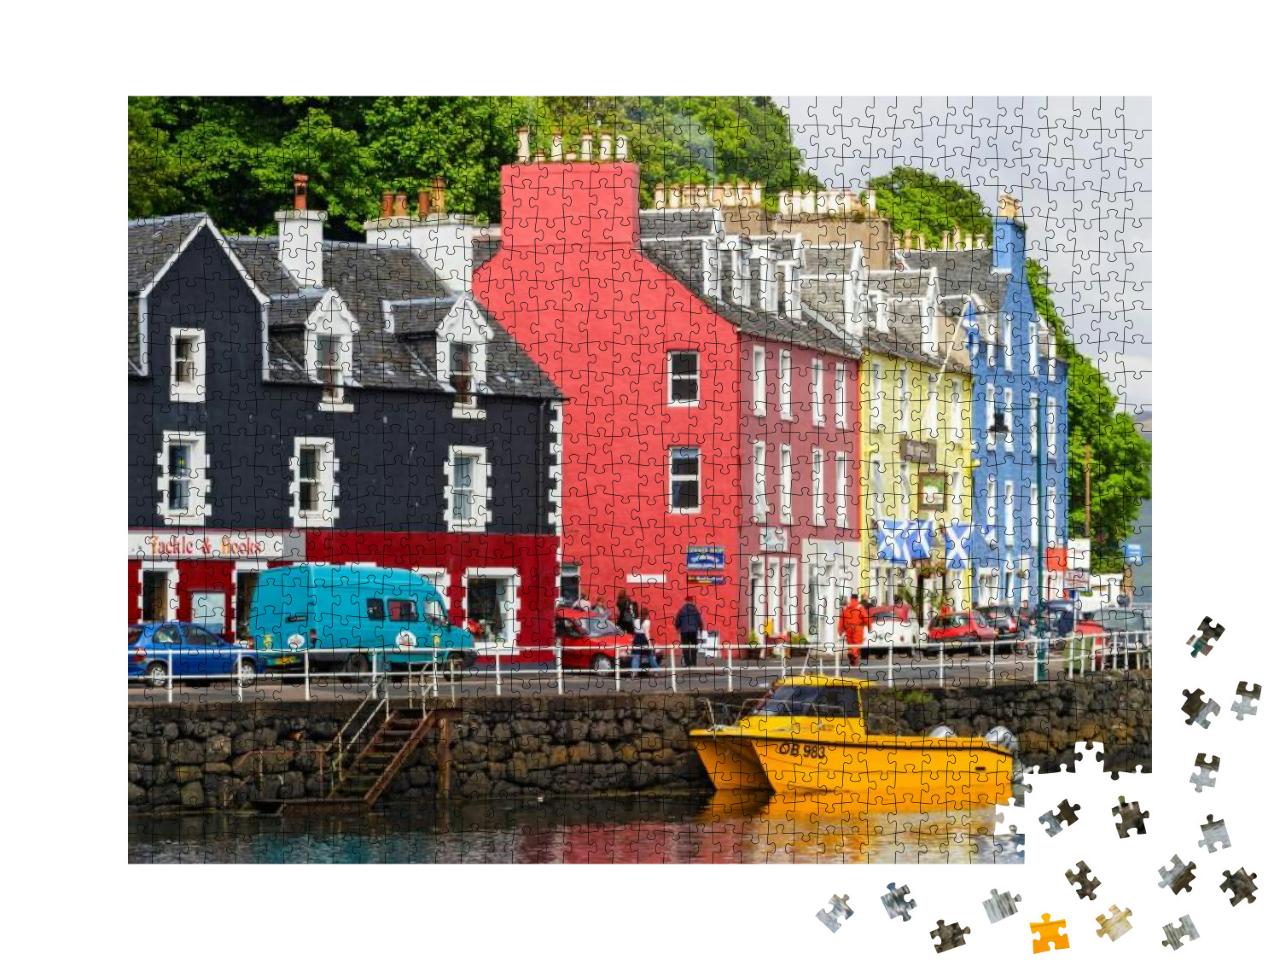 City Street At Colorful Houses in the Port of Tobermory i... Jigsaw Puzzle with 1000 pieces